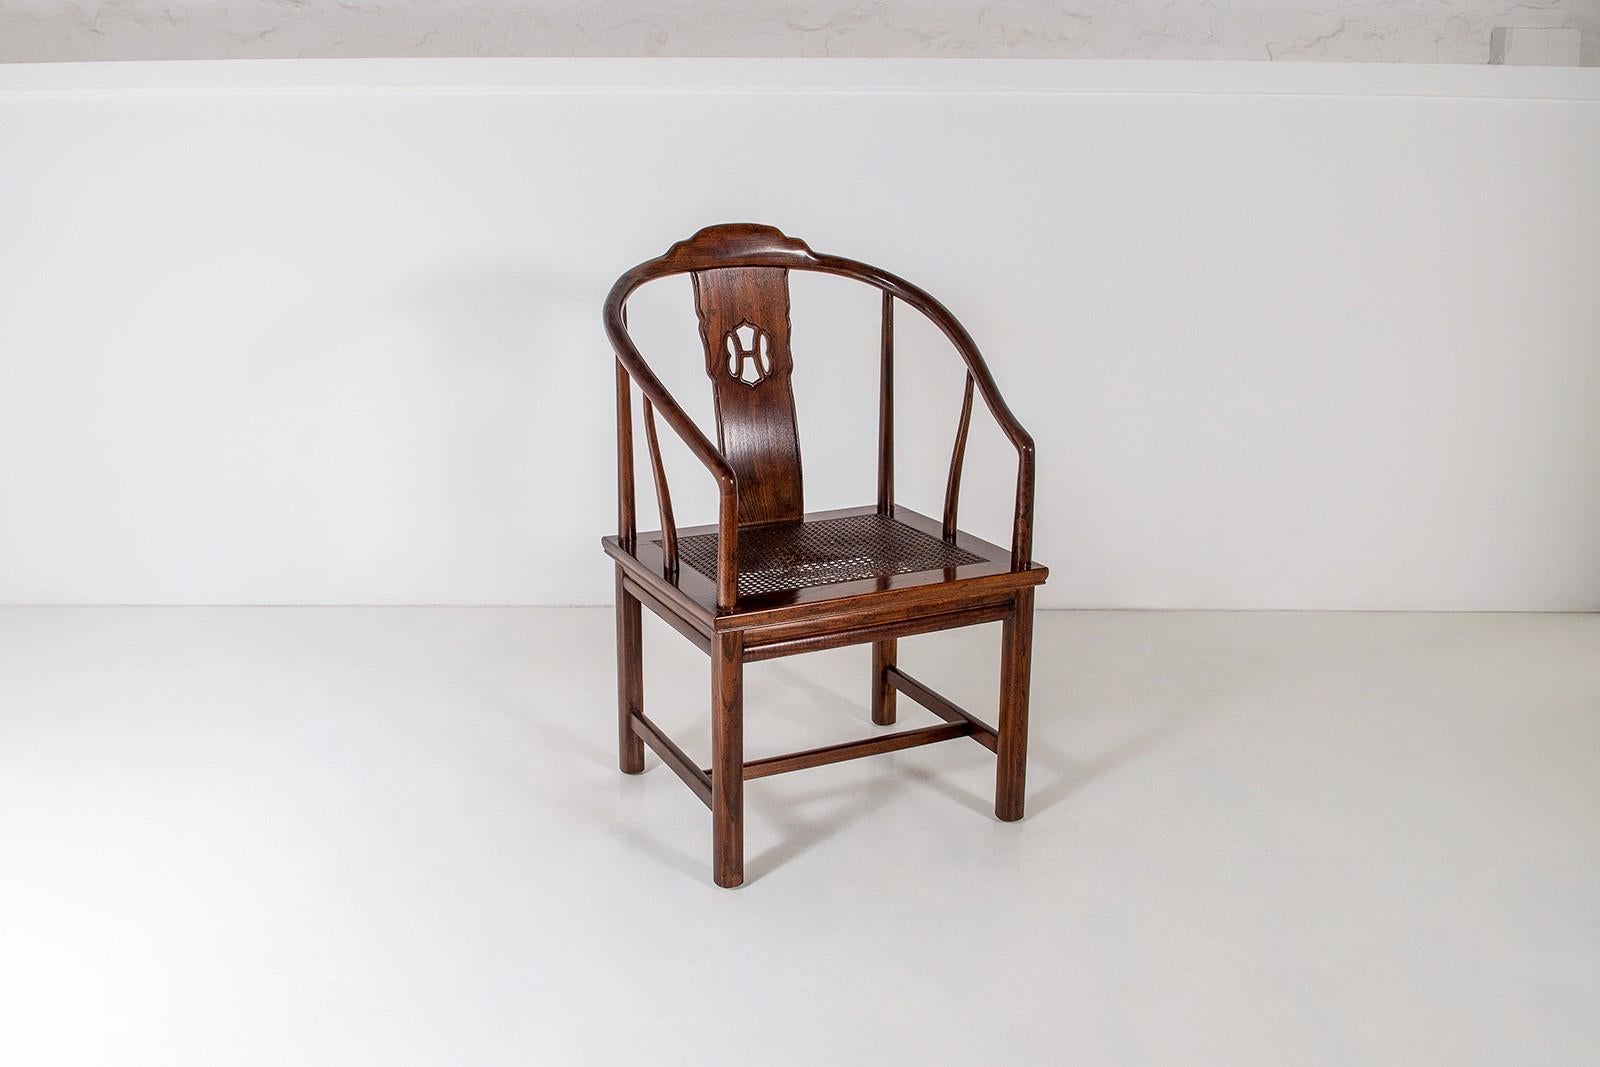 An early 20th century Chinese Horseshoe Chair of late Qing / early Republic Era. Superb form with horseshoe back and sweeping arms, single vertical slat carved backrest with roundel, a cane rectangular seat above a shaped apron and four round shaped